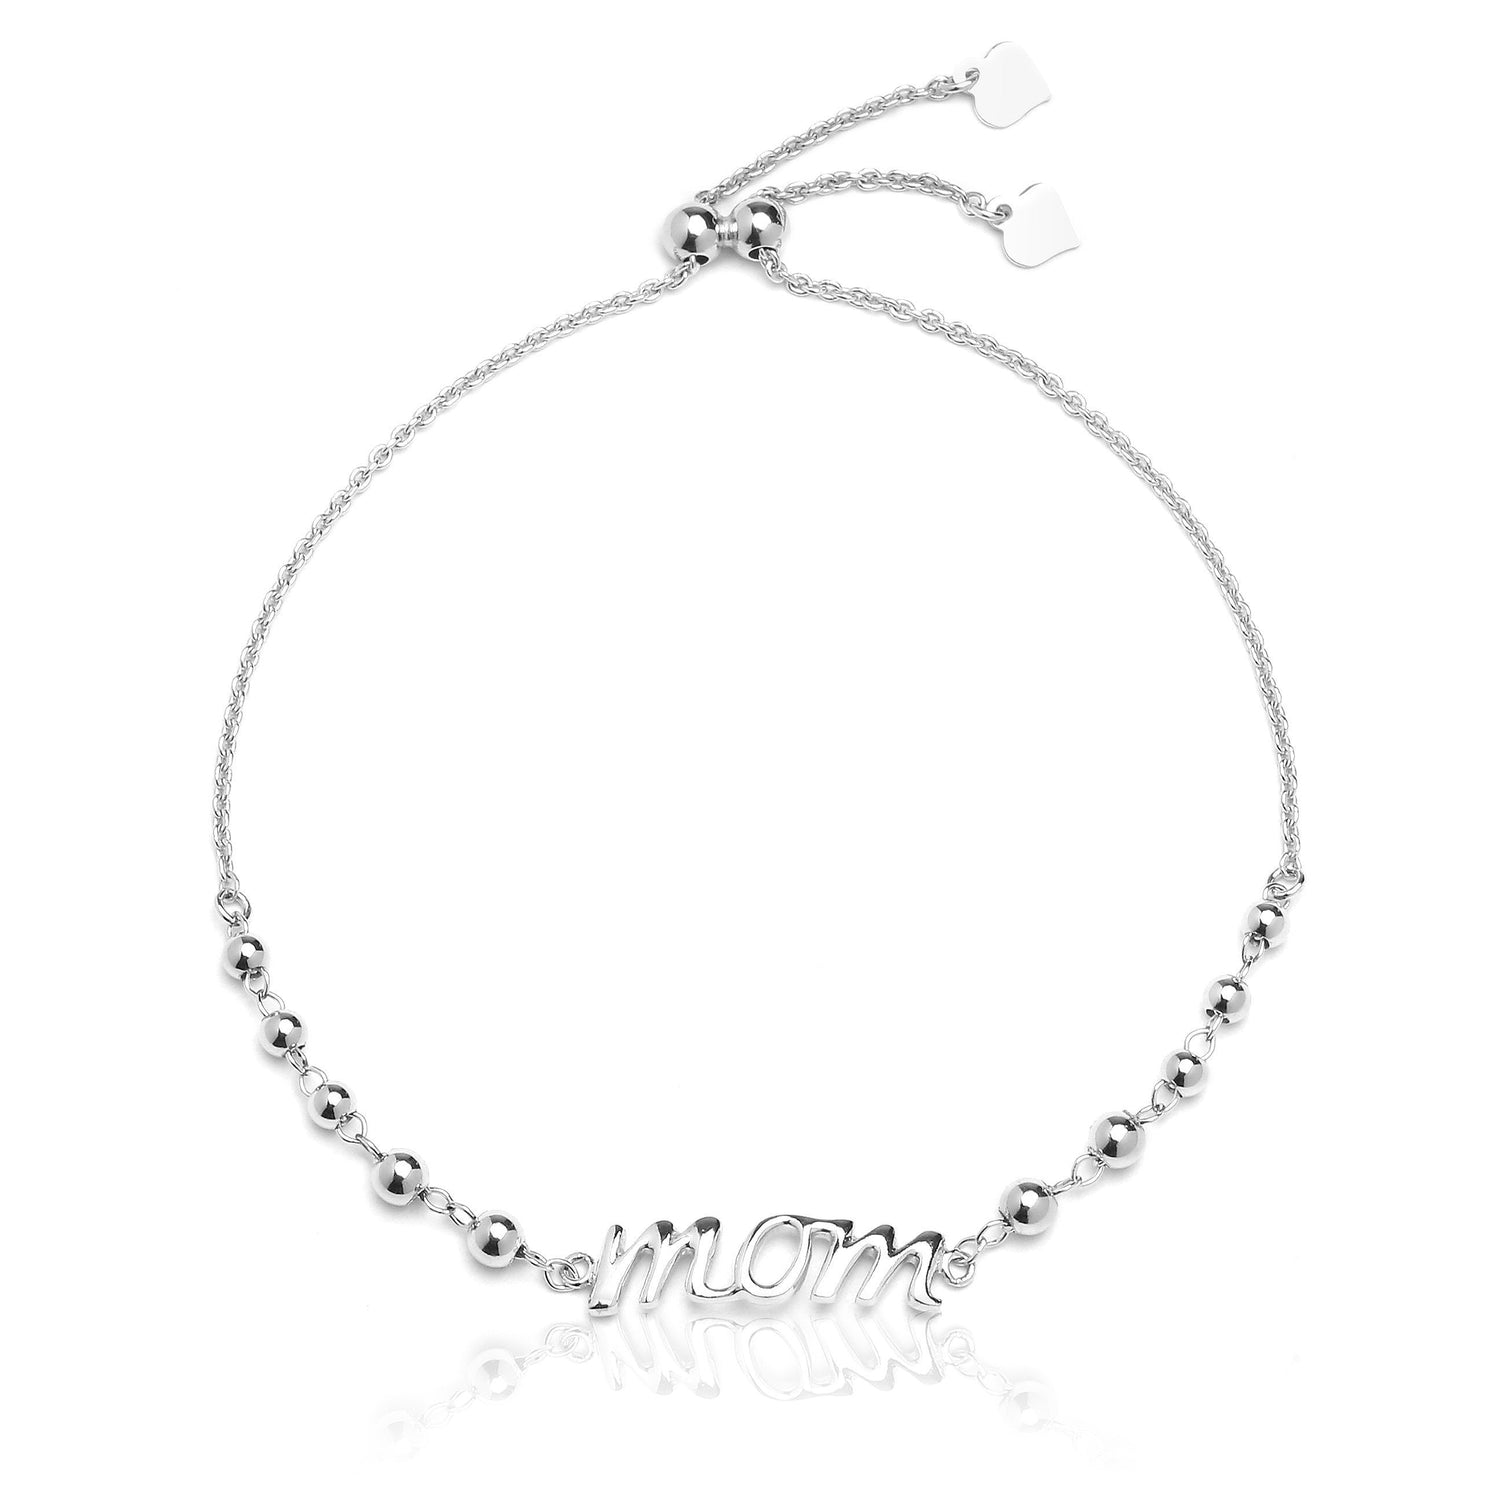 Sterling Silver Adjustable Mom Bracelet with Beads for Mothers, 9 Inch